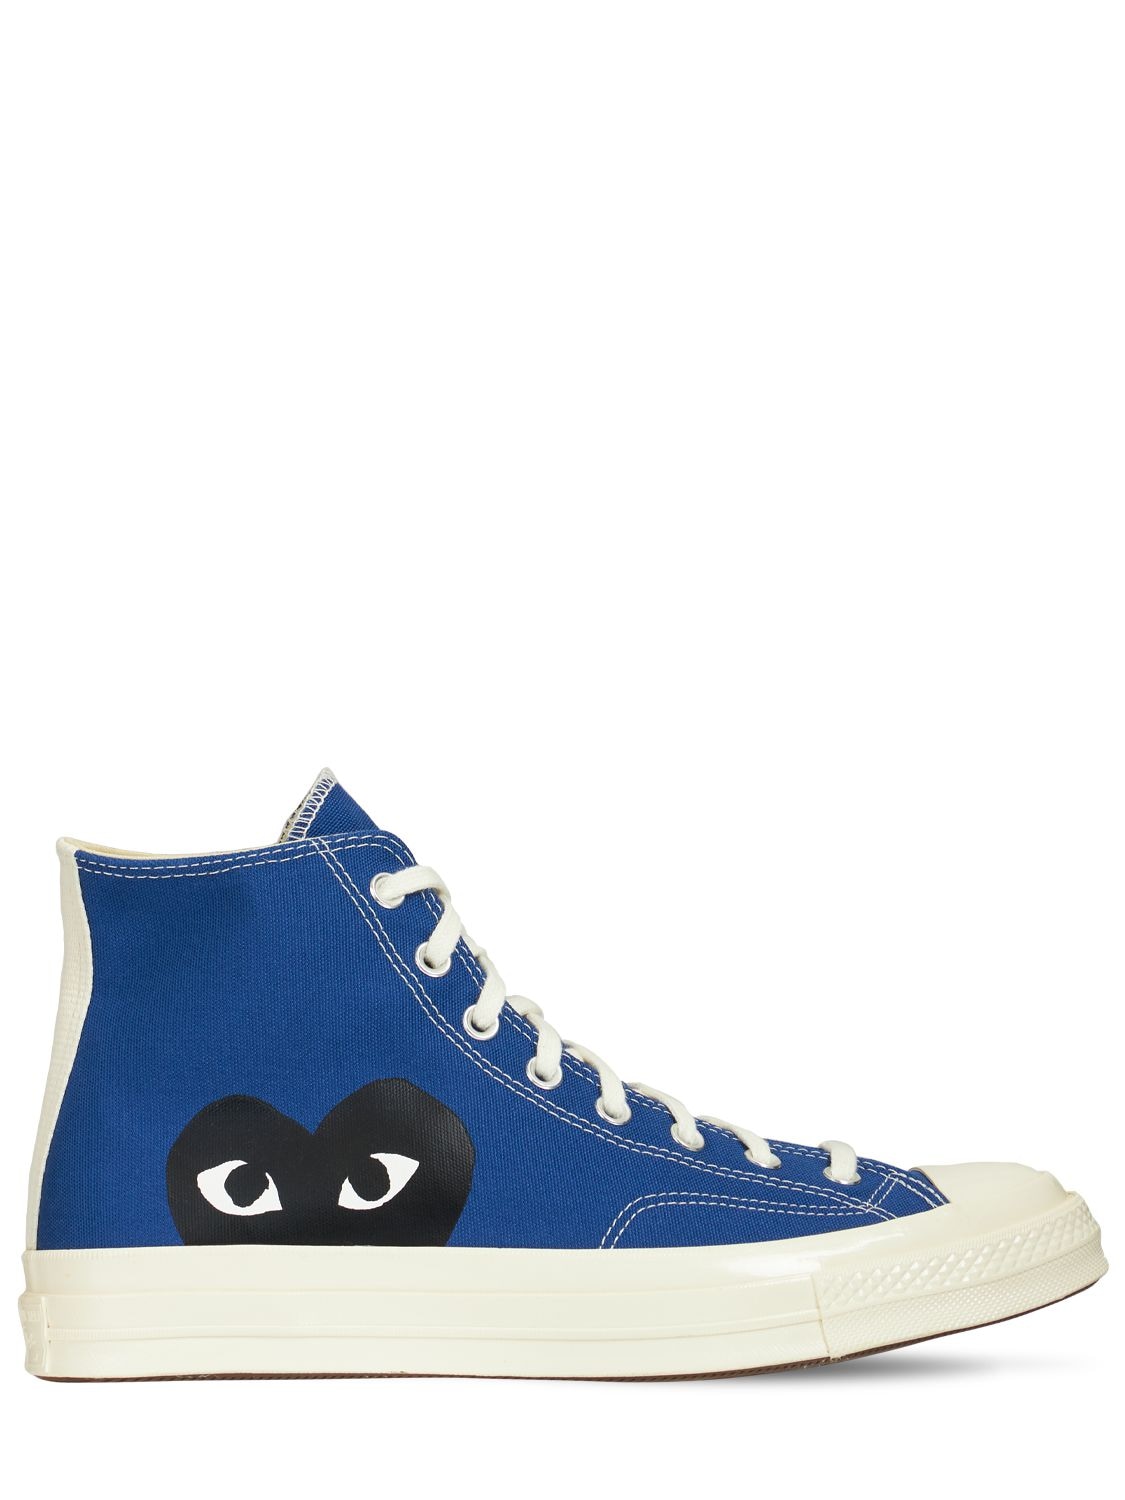 Comme Des Garçons Play Play Converse Cotton High Sneakers In Blue